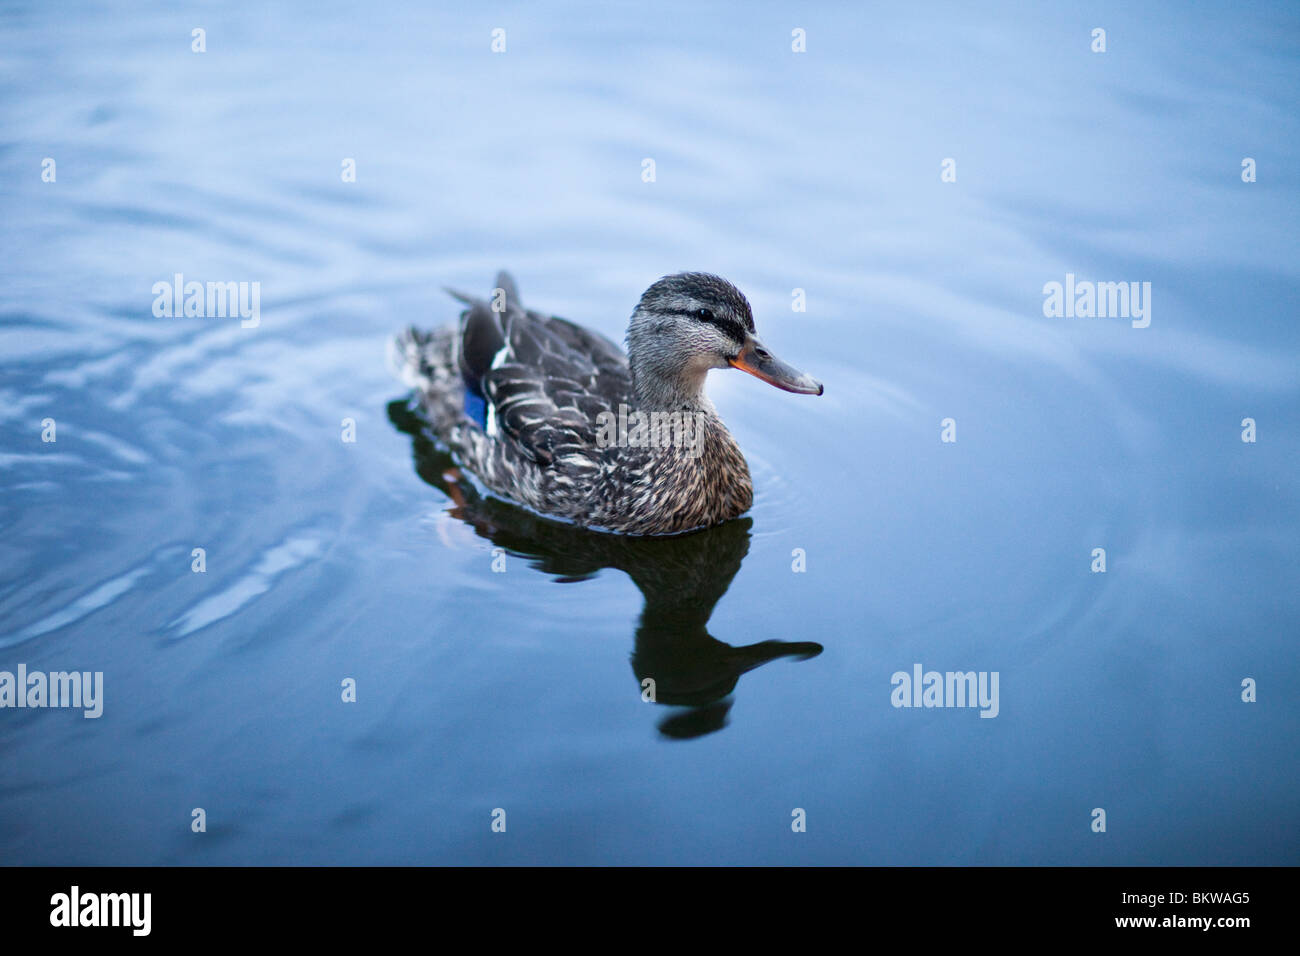 Lonely duck in the water Stock Photo